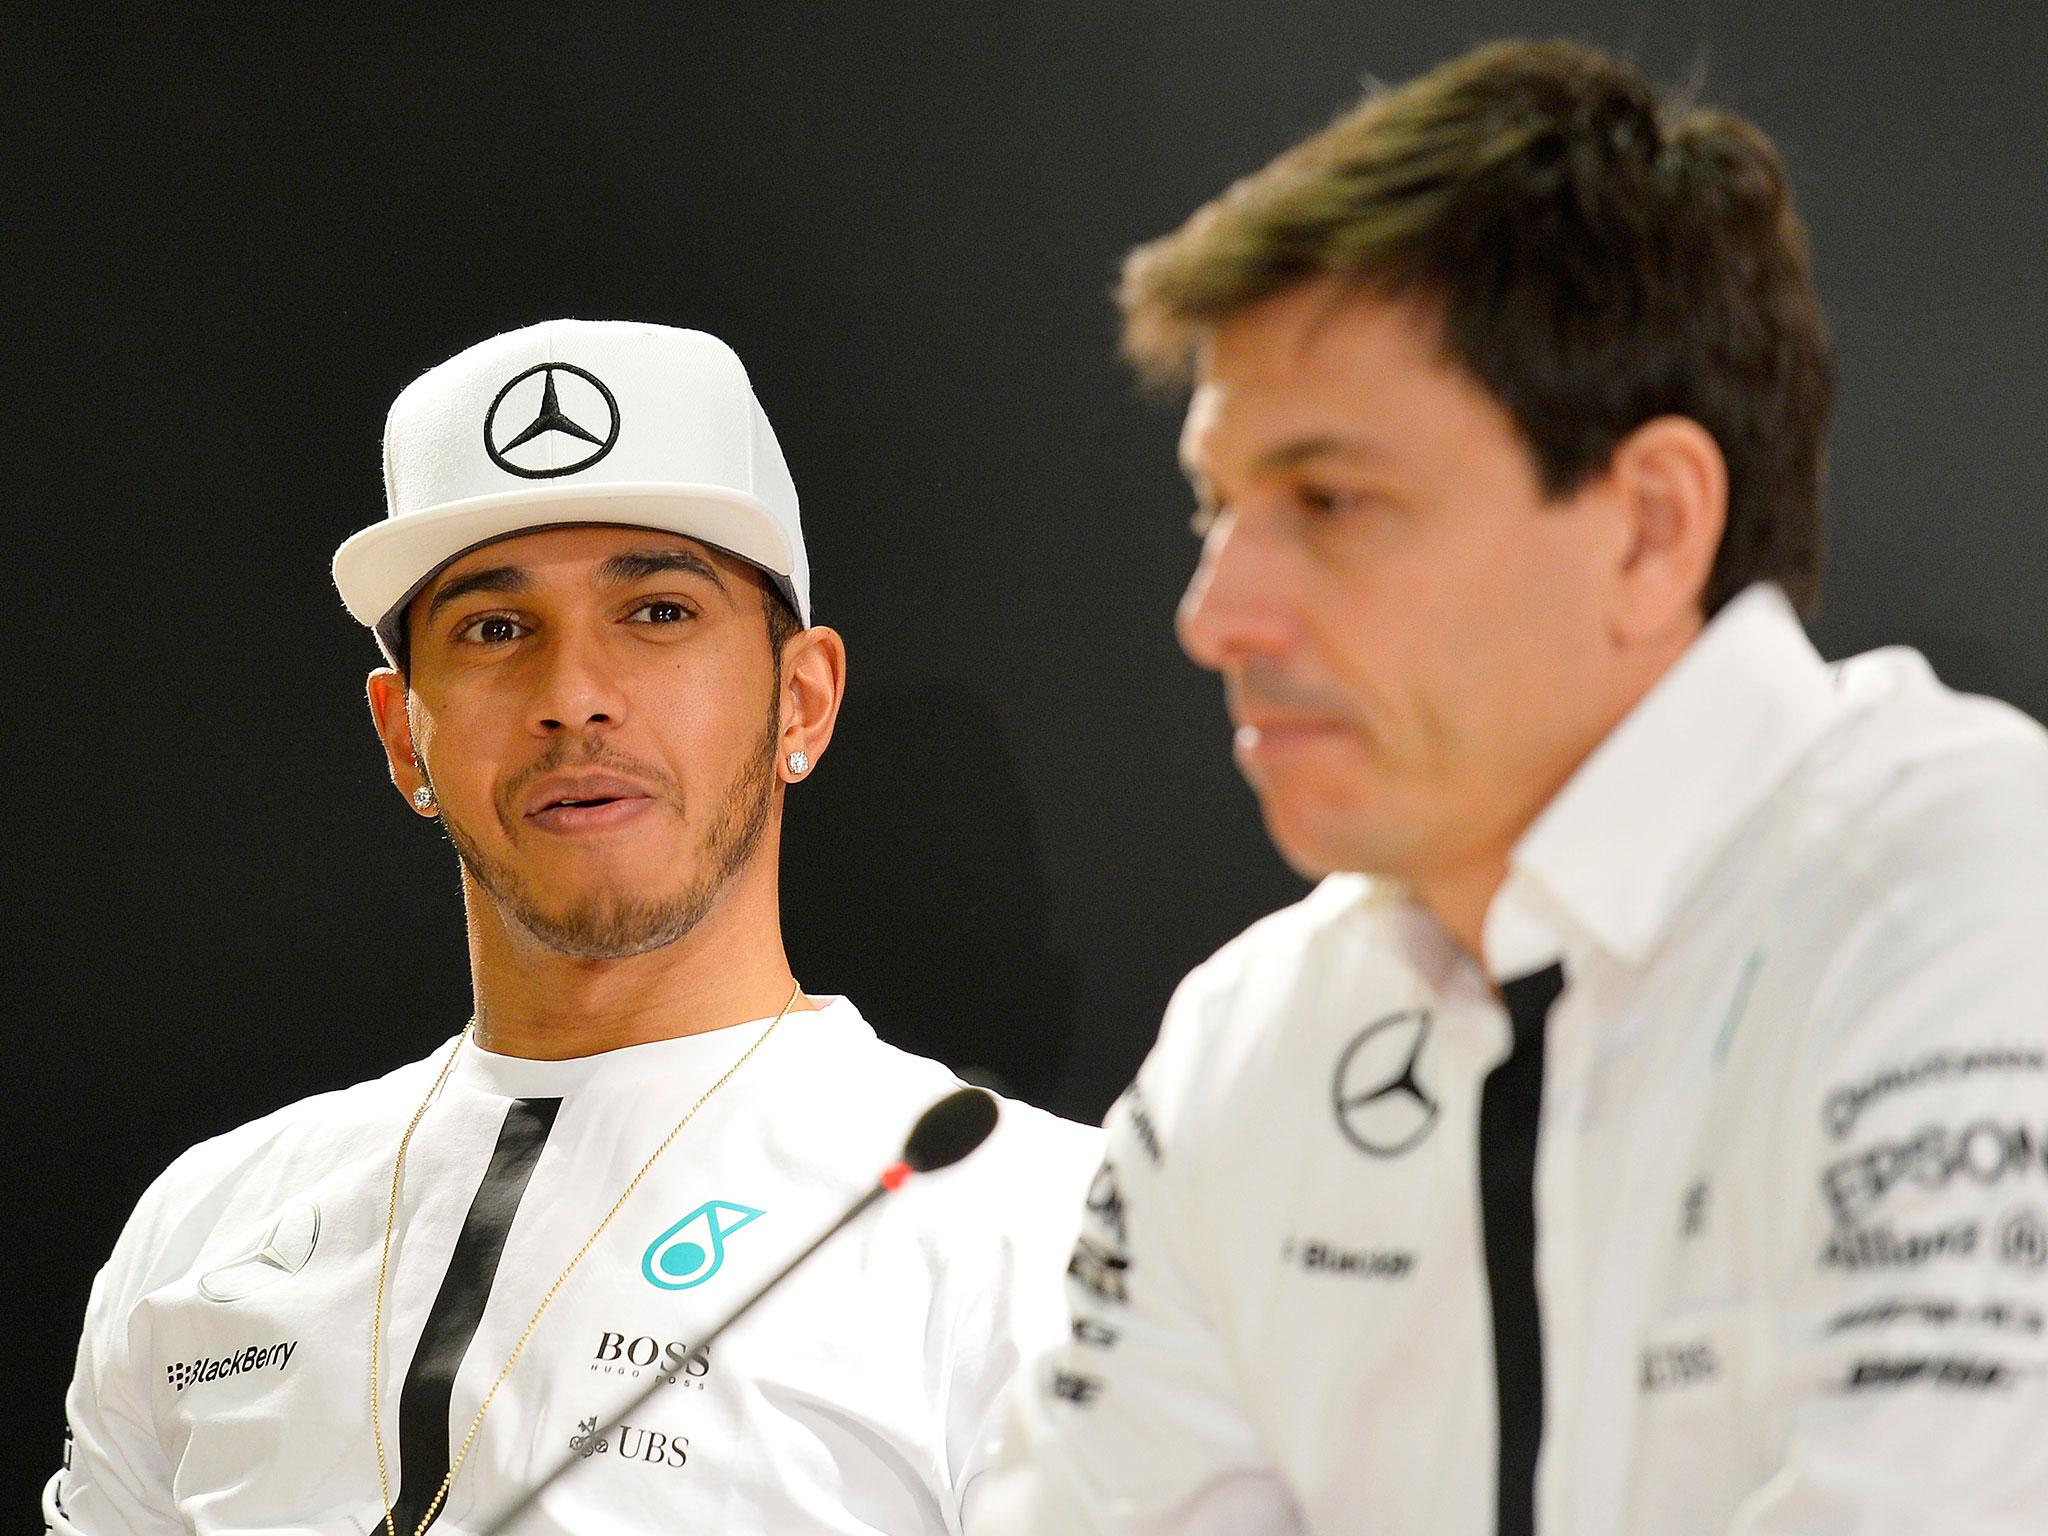 "We had a really fantastic meeting and we will be coming back so strong in 2017," Wolff said